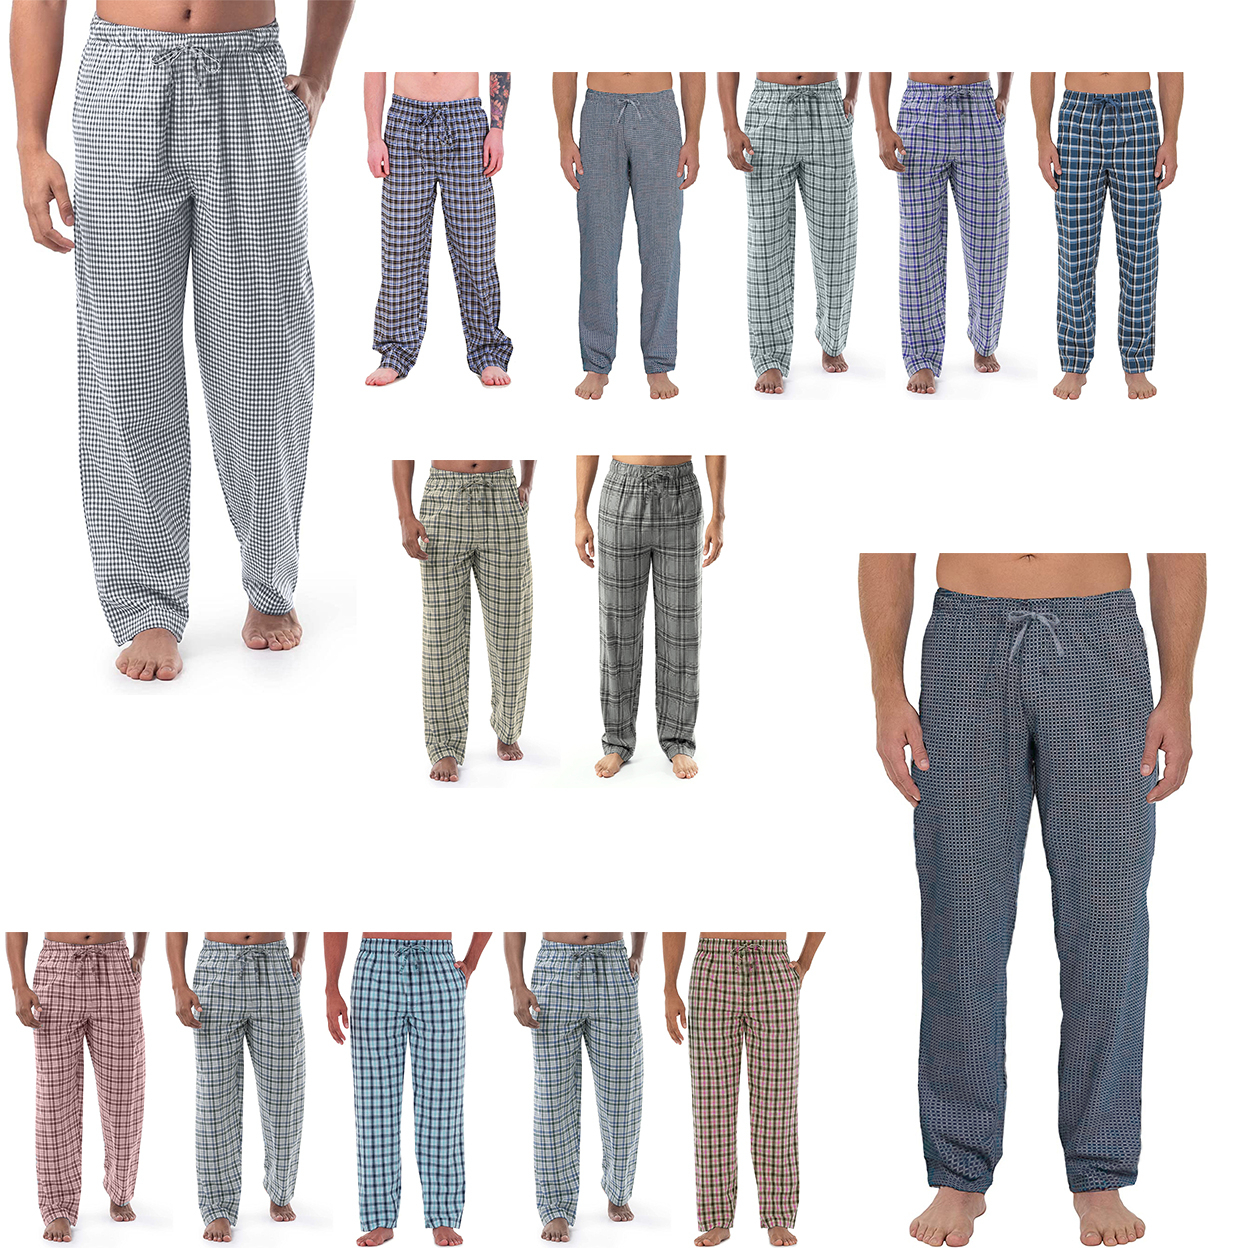 3-Pack: Men's Soft Jersey Knit Long Lounge Sleep Pants With Pockets - Plaid, Large